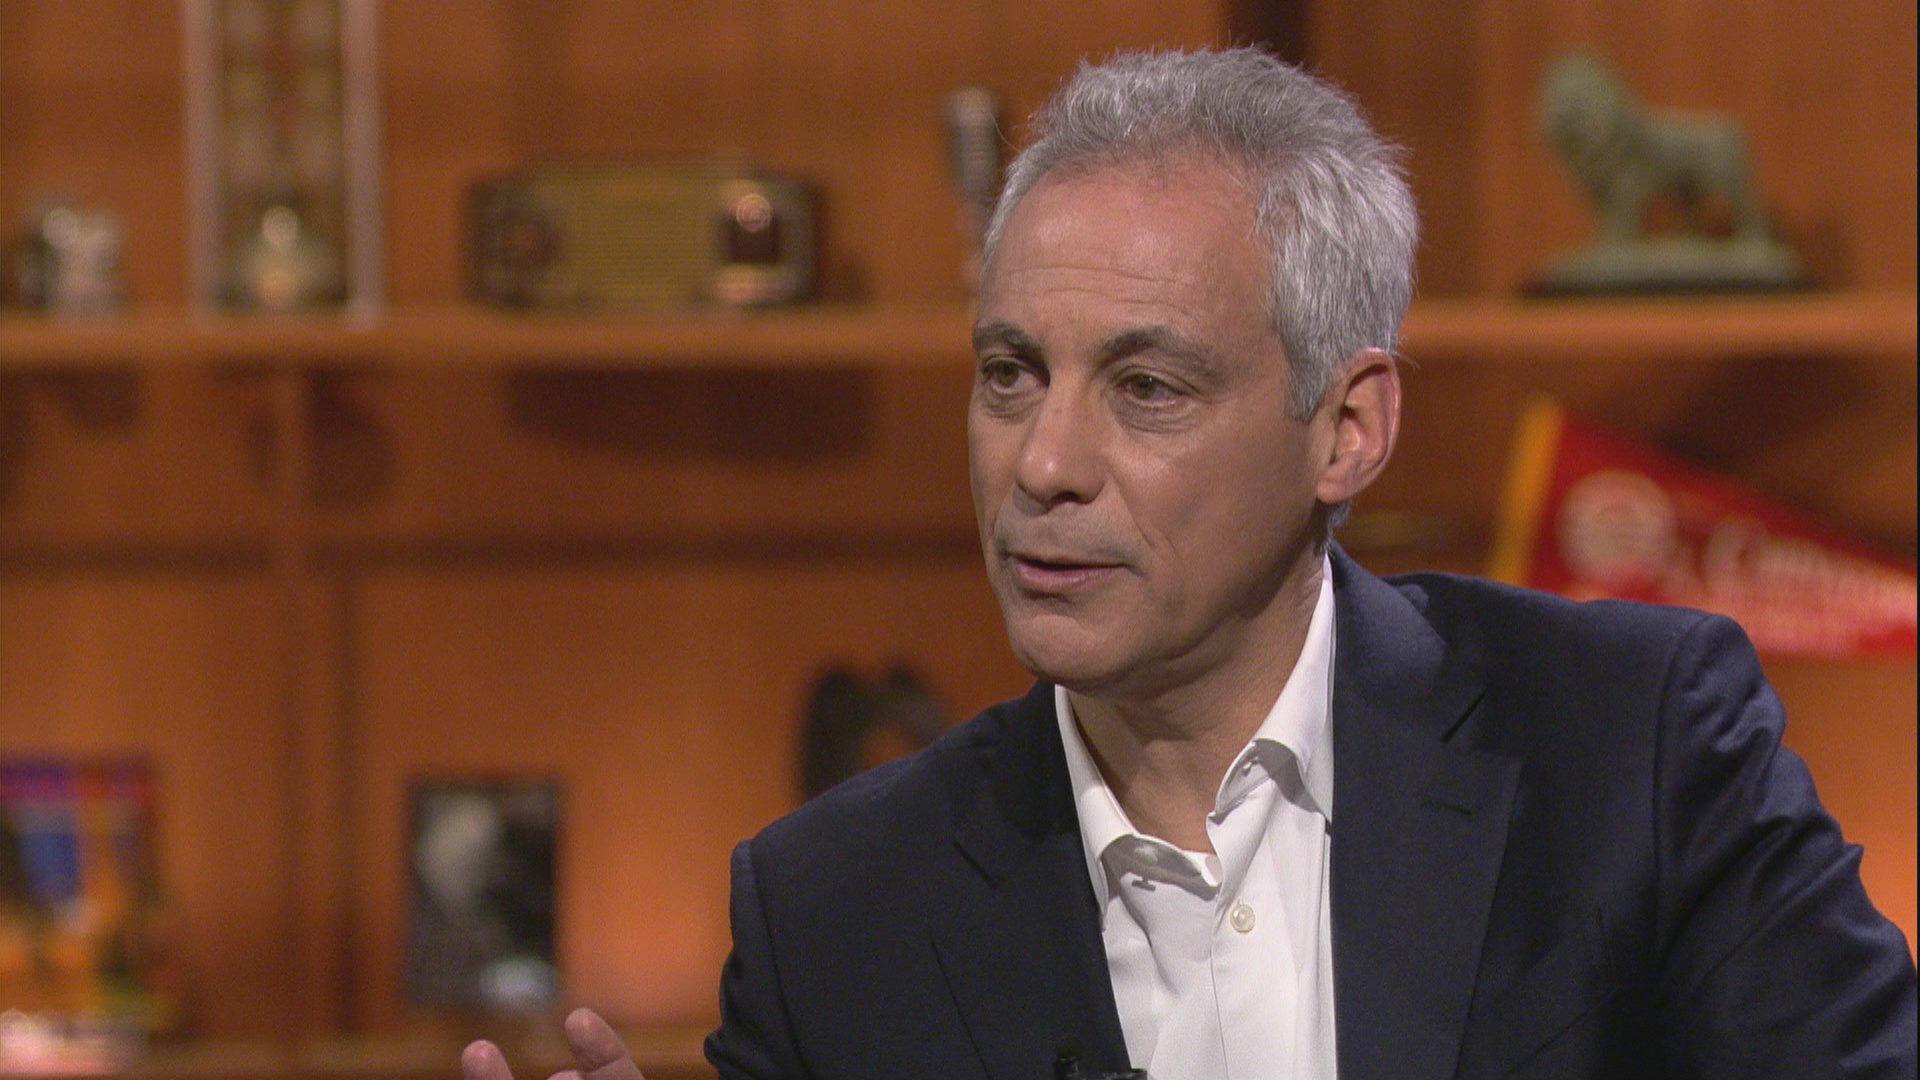 Rahm Emanuel appears on “Chicago Tonight” on Monday, May 13, 2019.